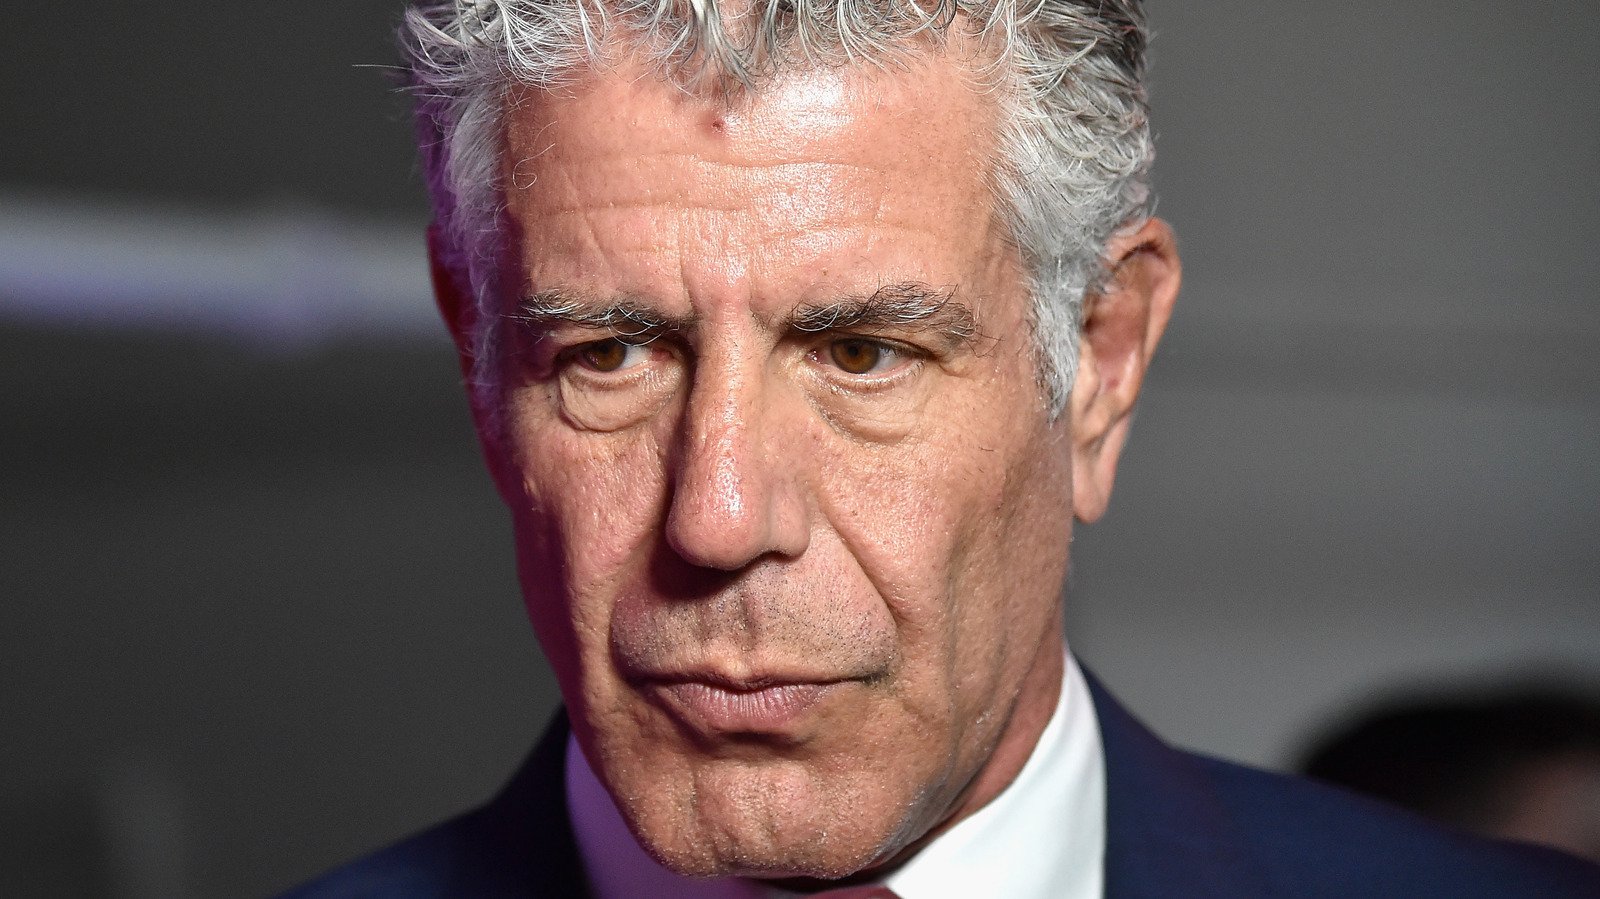 Of Anthony Bourdain's Insults, This One Was The Harshest